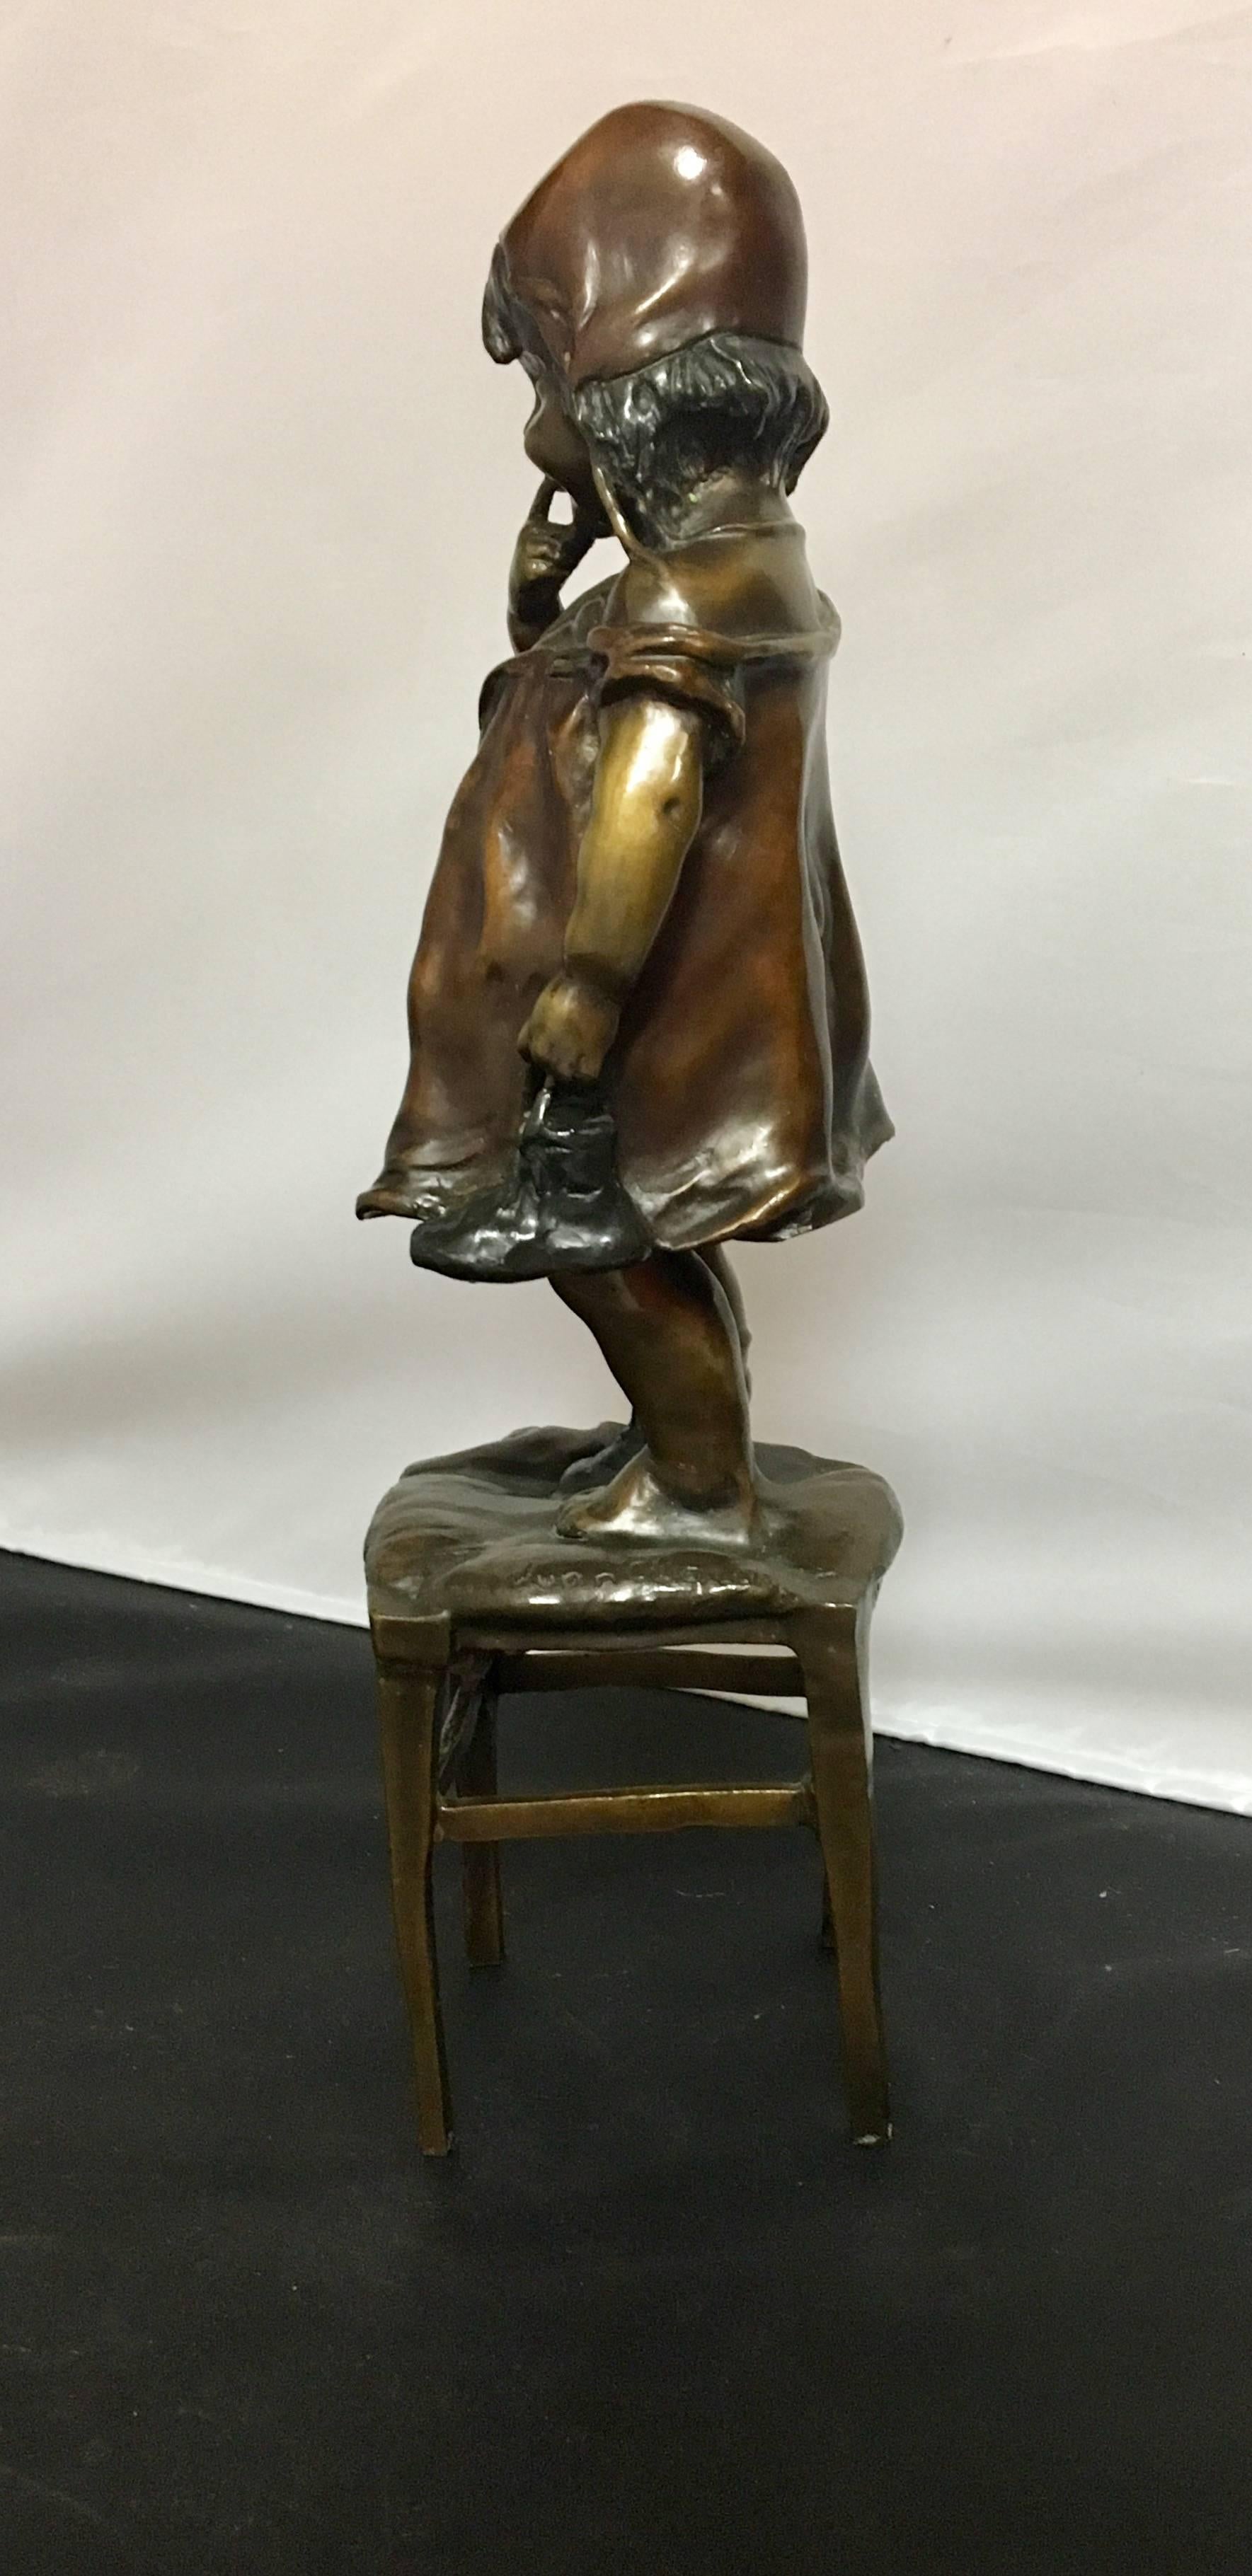 Charming Art Nouveau inspired bronze figurine of a young girl standing on a stool signed by Juan Clara with foundry marks.